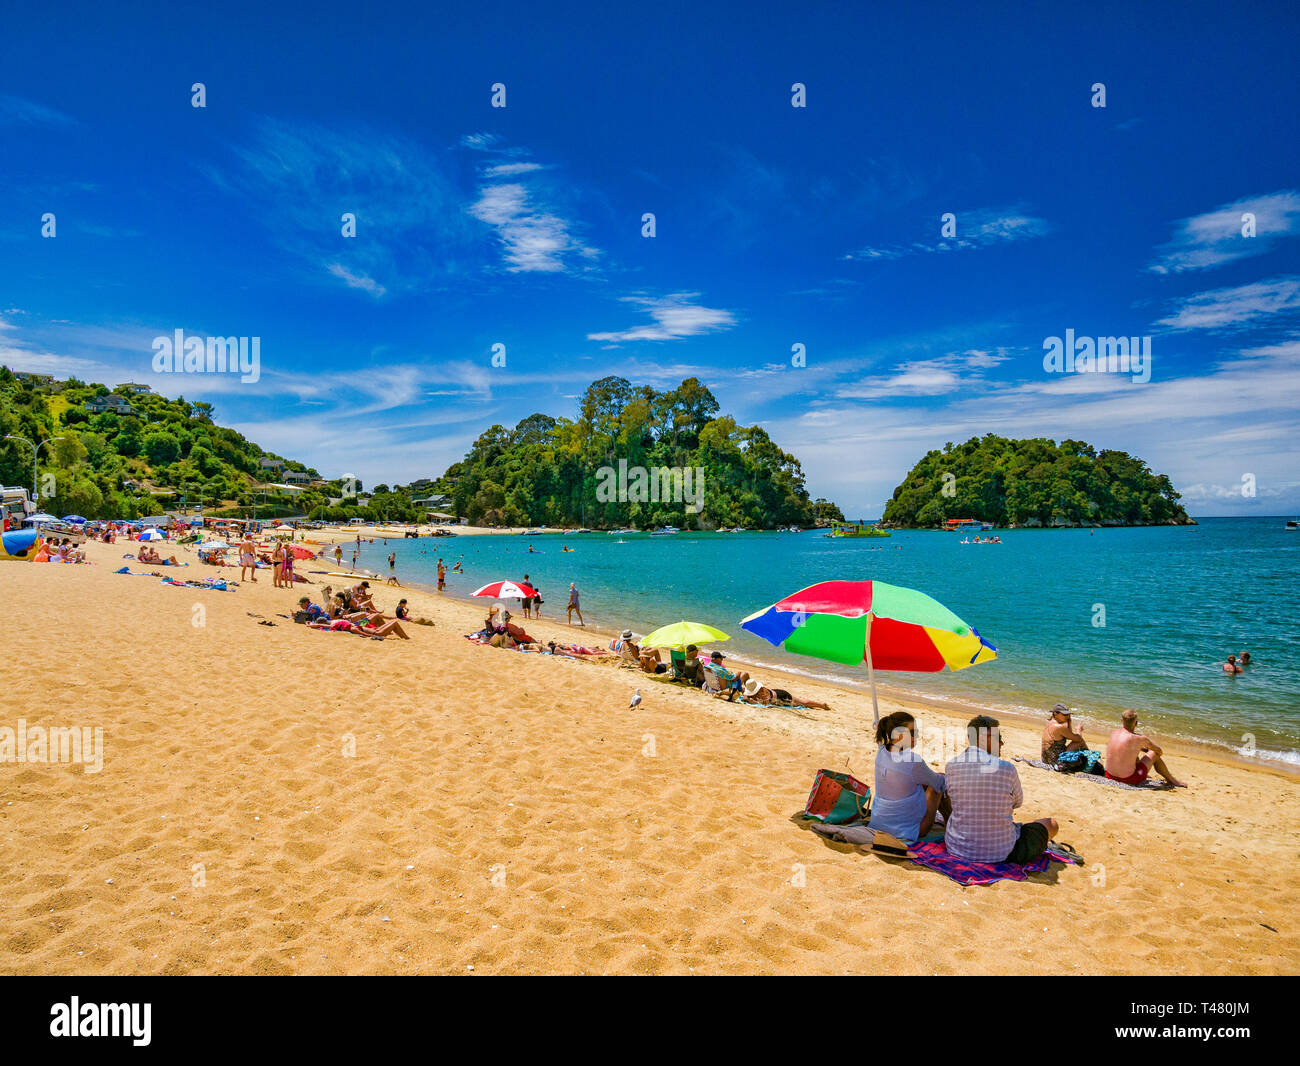 13 January 2019: Tasman, New Zealand - Gateway to Abel Tasman National Park, Kaiteriteri Beach is famous for its golden sand and turquoise water. Stock Photo